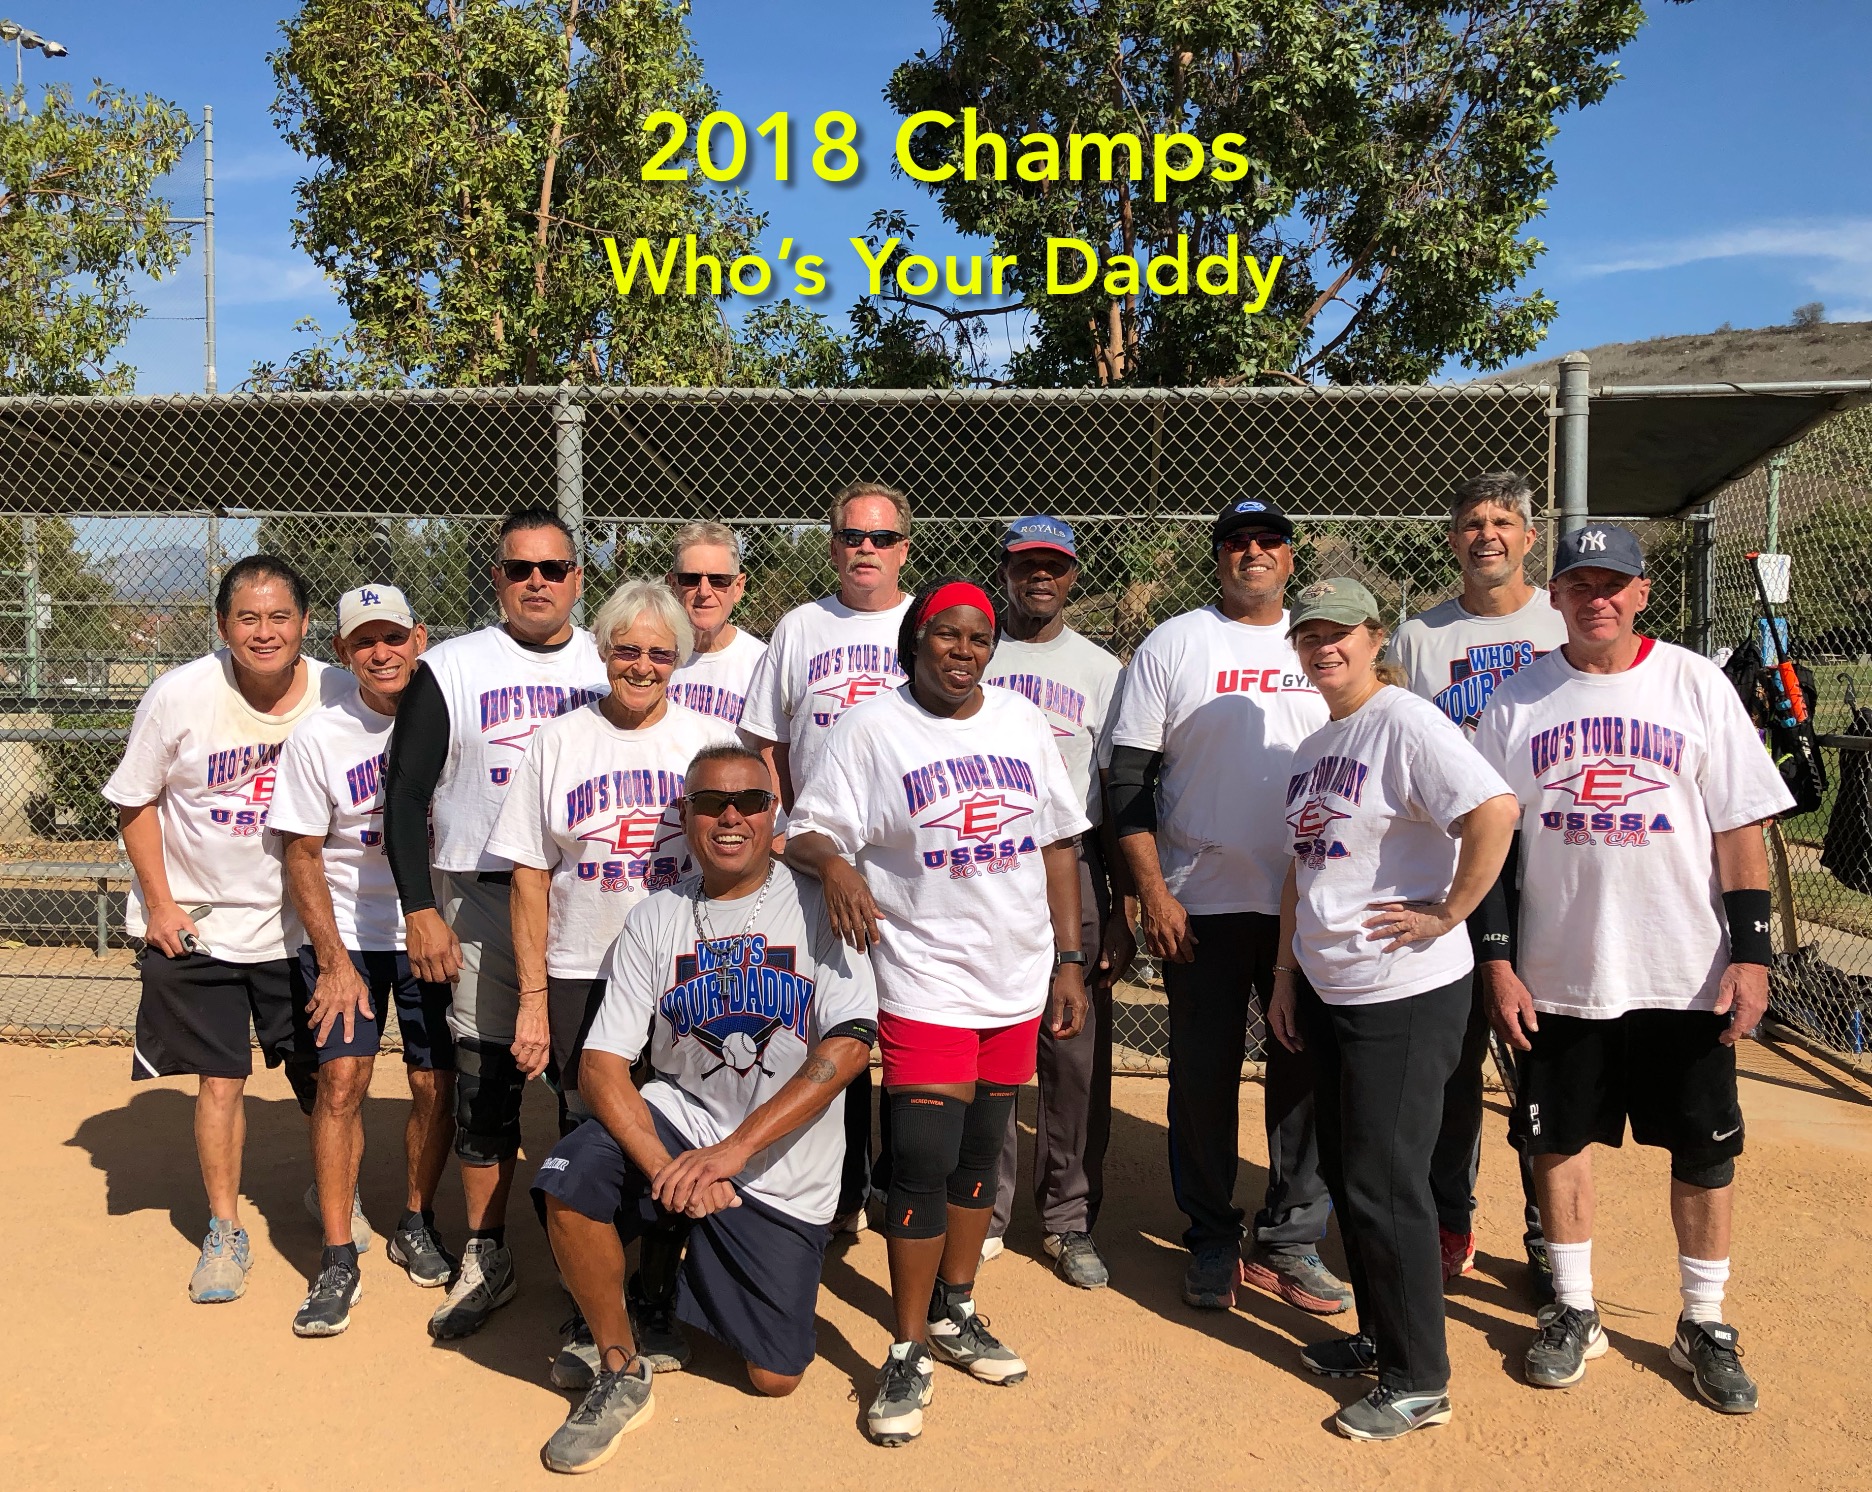 2018 Champs - Who's Your Daddy